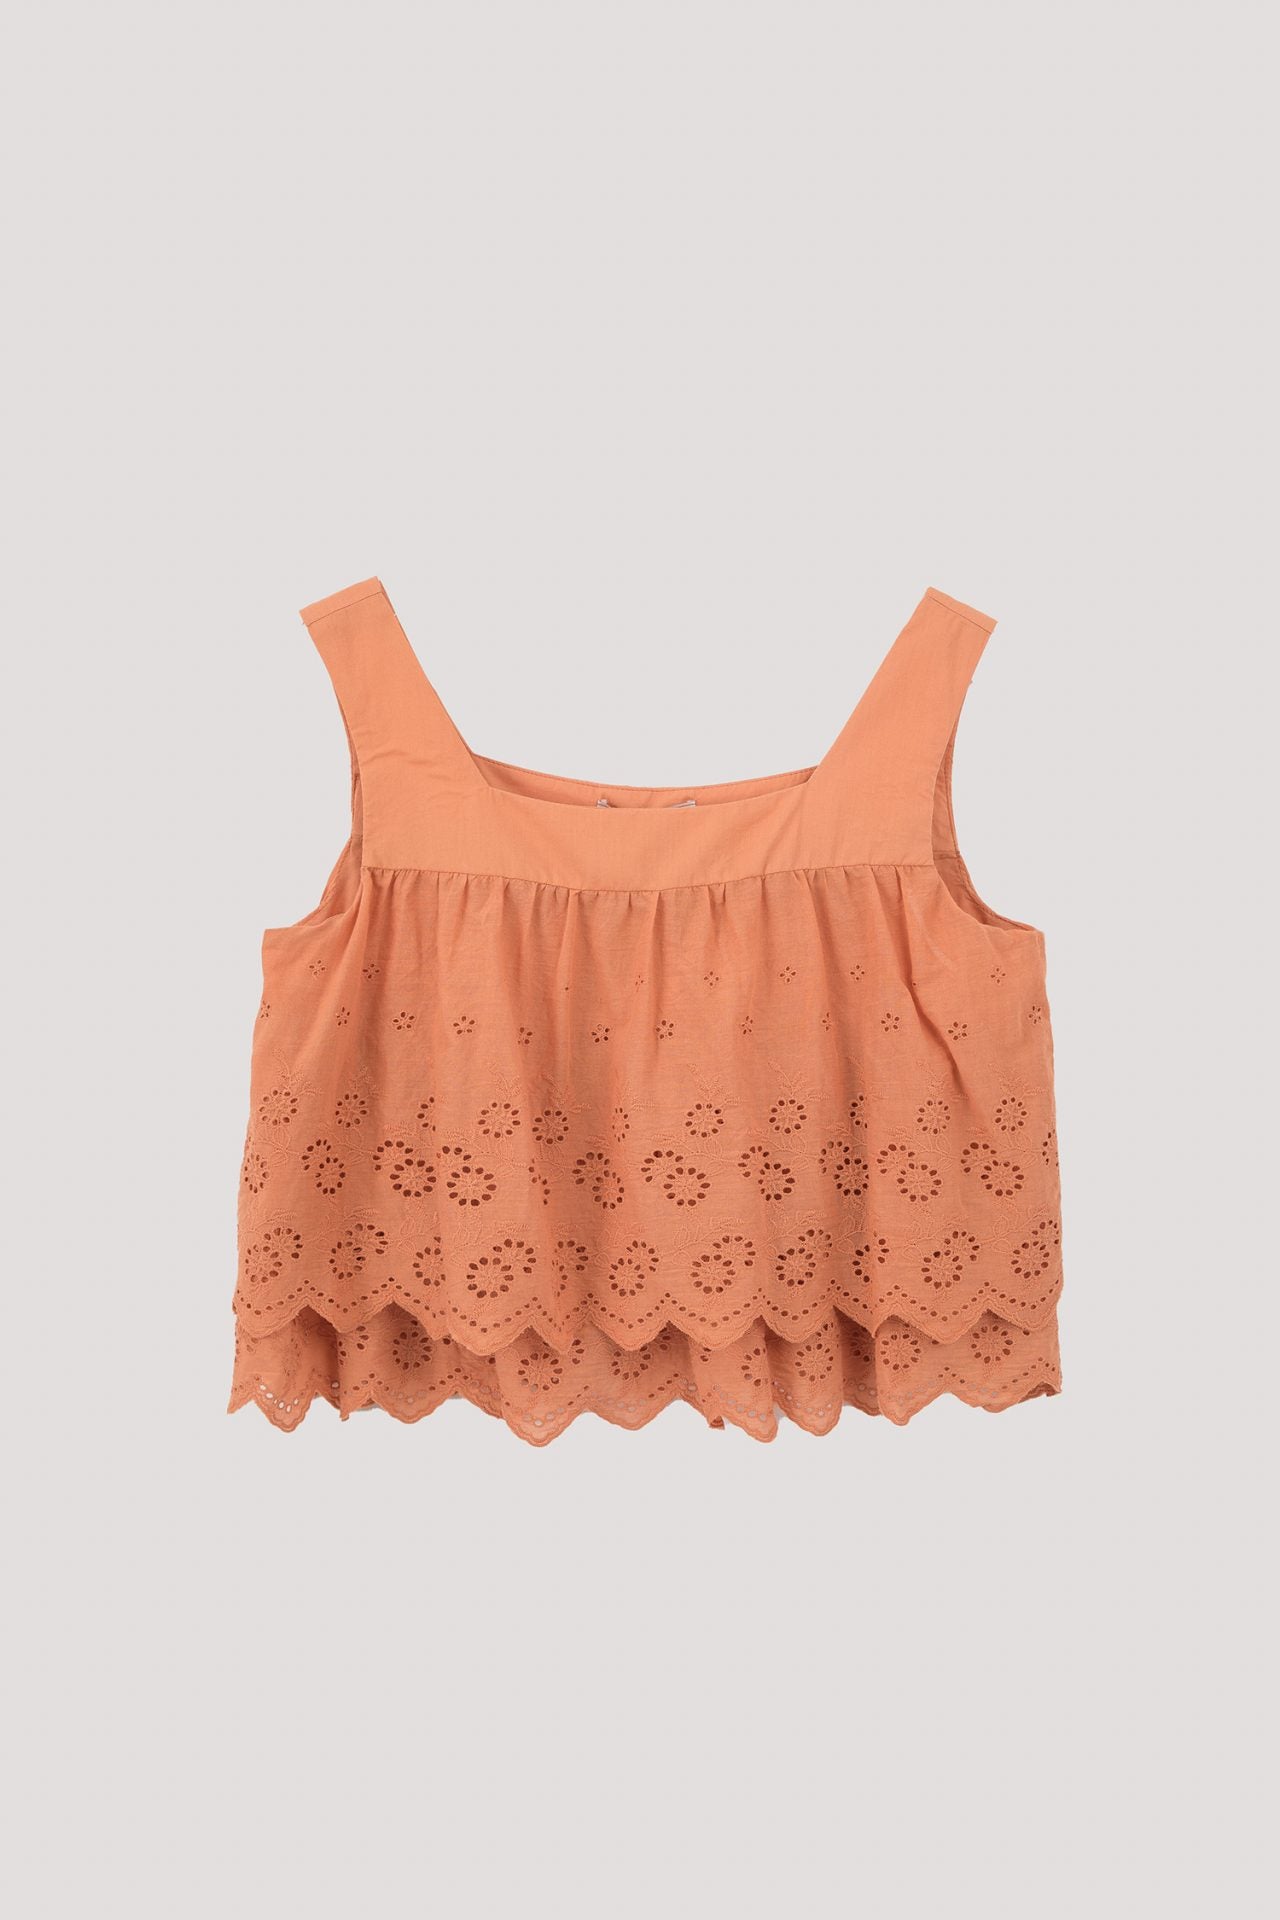 BBV 10200 LACED LAYERED CROP TOP PEACH